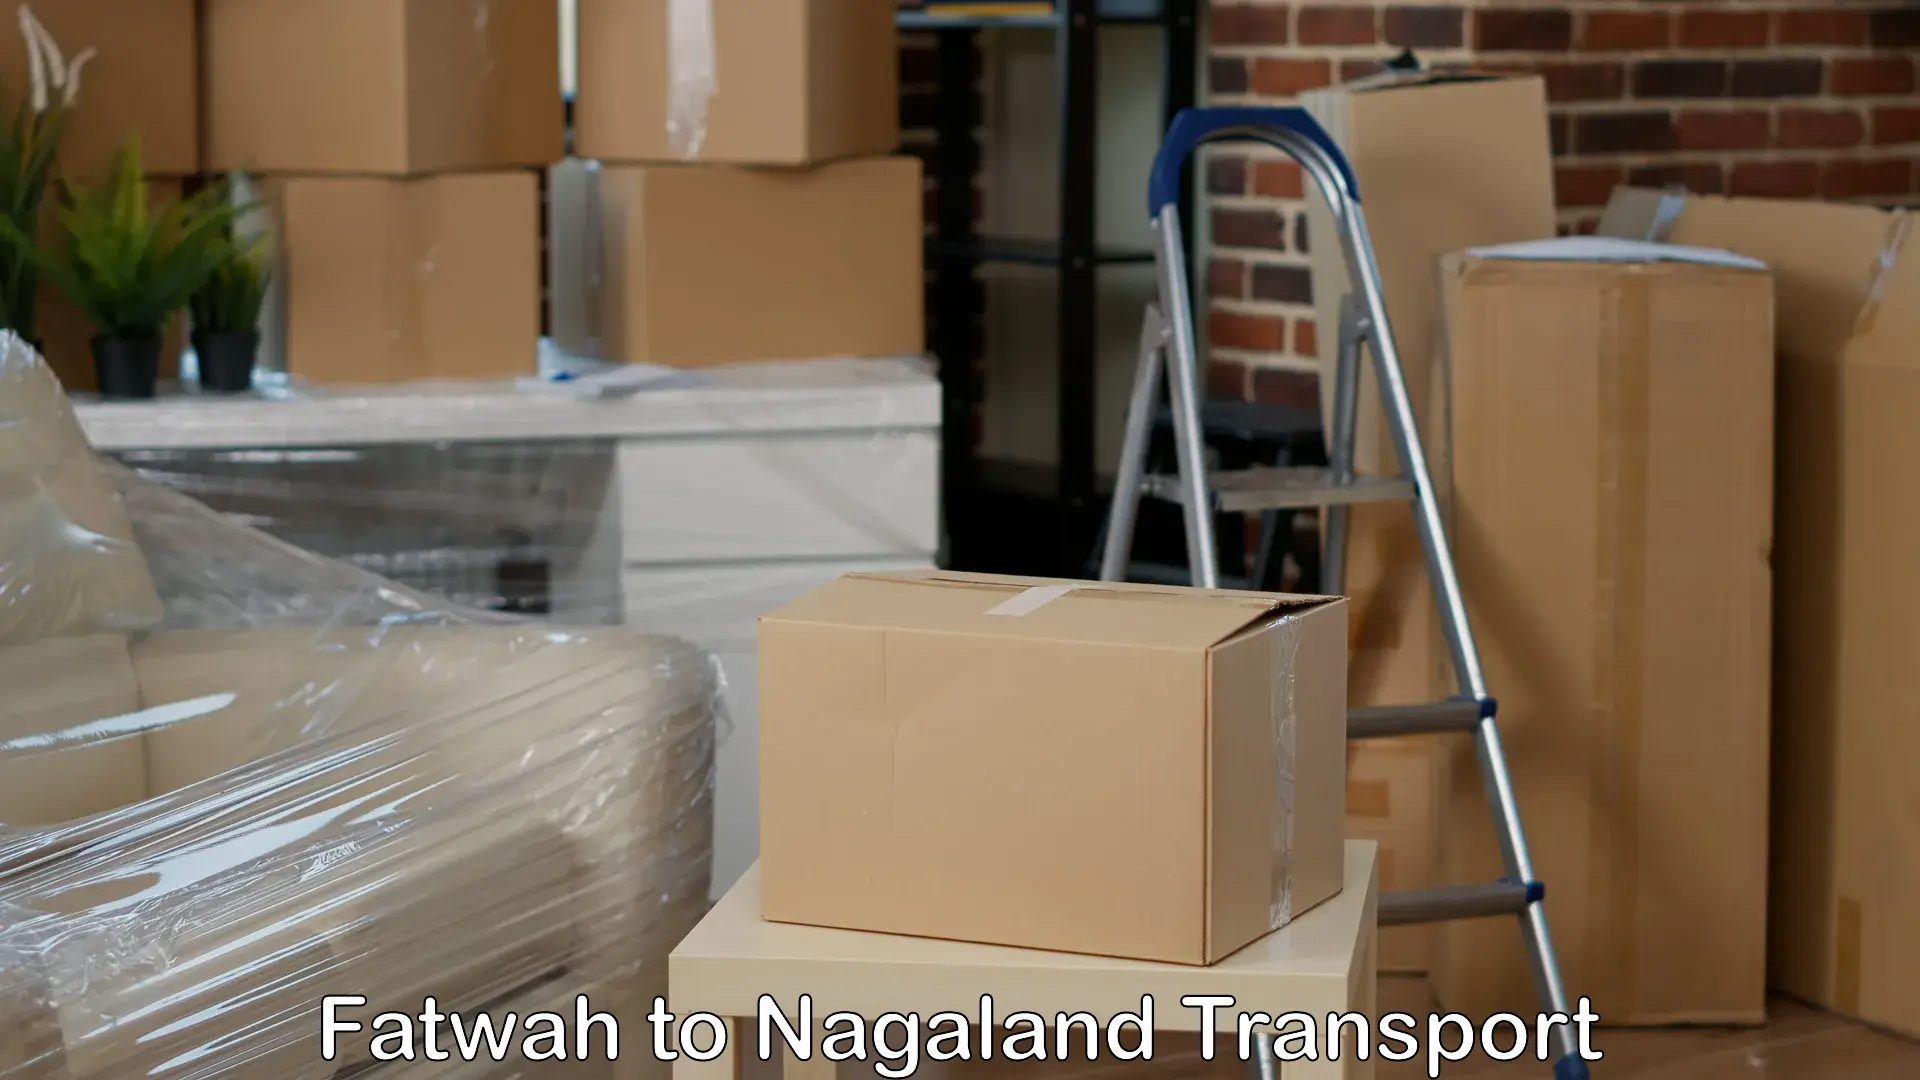 Daily transport service Fatwah to Nagaland